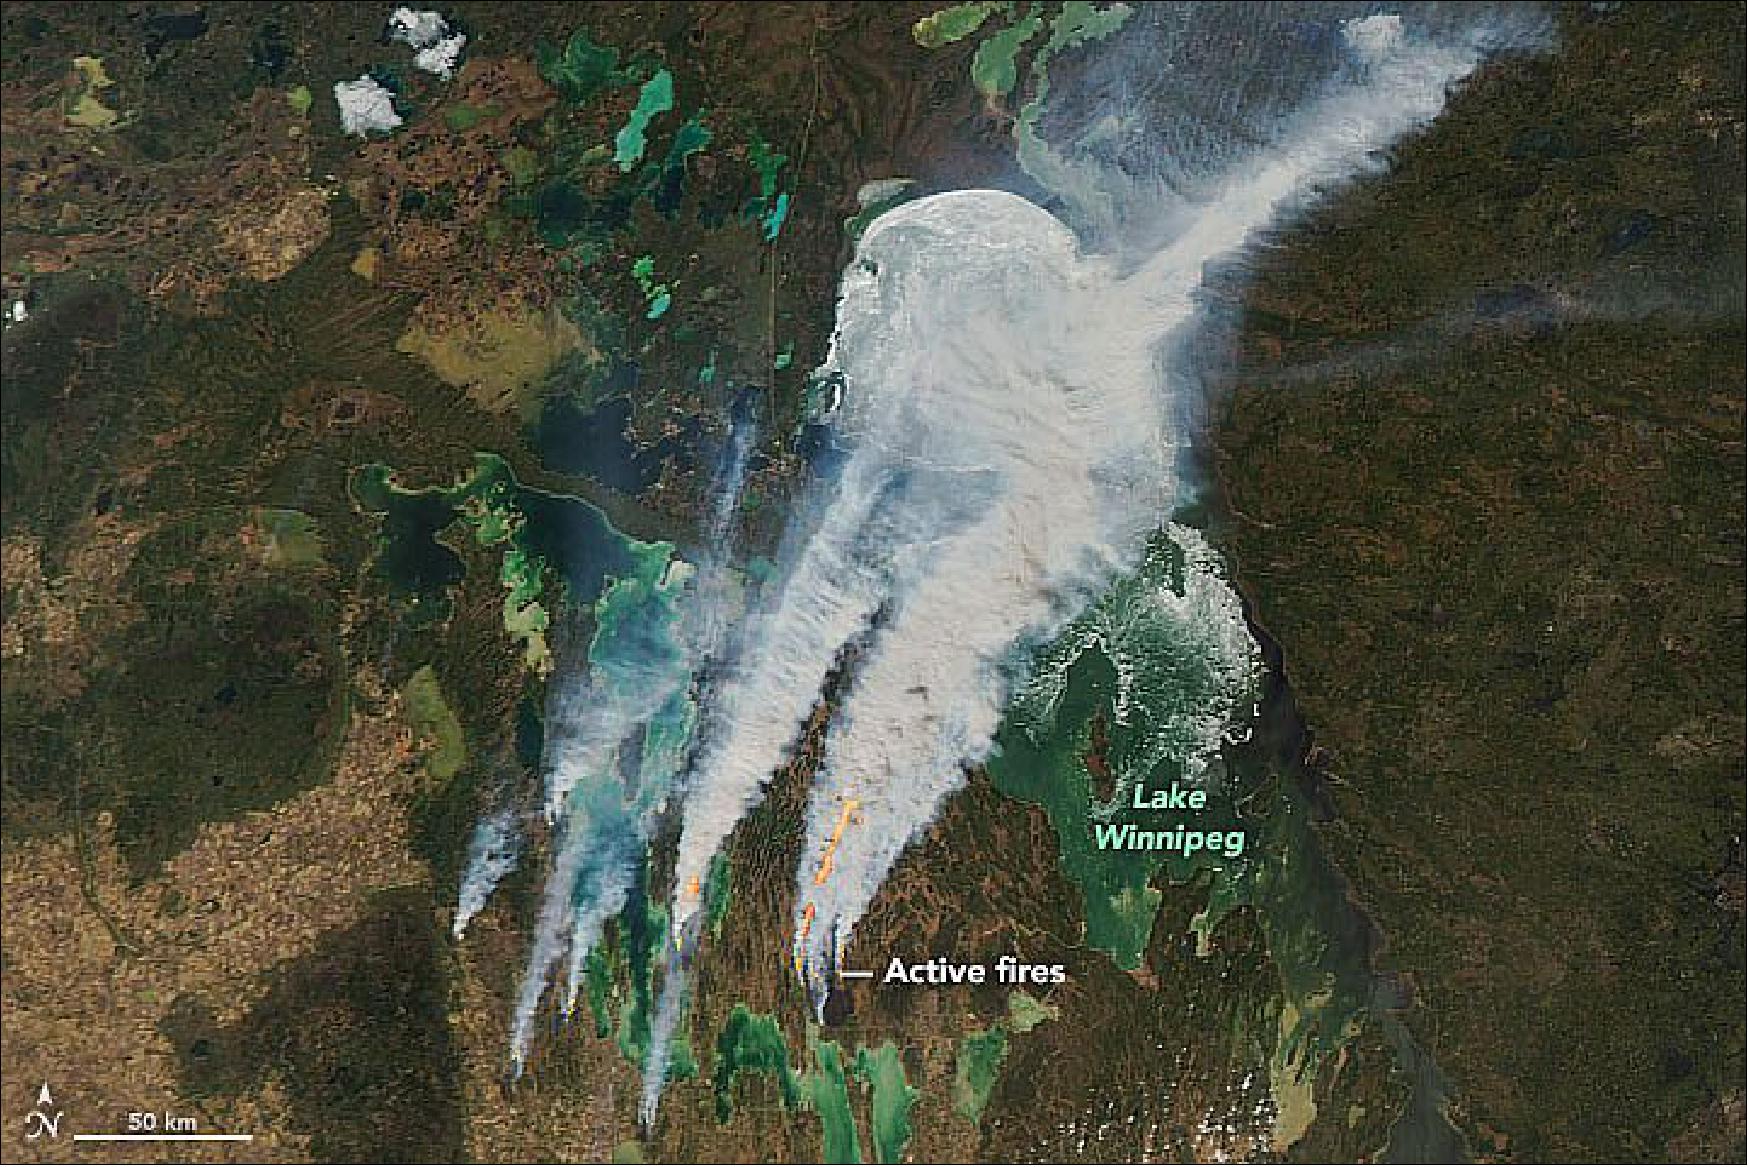 Figure 38: Canada’s Manitoba Province jumped right from winter ice to summer fires. On 18 May 2021, The MODIS instrument on NASA’s Aqua satellite acquired this natural-color image of smoke billowing from several intense wildfires west and southwest of Lake Winnipeg. Strong westerly winds drove the plumes across Hudson Bay and the Canadian interior as far as Quebec. Other fires (not shown) burned to the west in Saskatchewan and to the east in Ontario. Researchers examining NOAA GOES satellite images detected hints of pyrocumulus “fire cloud” formation south of Lake Winnipeg (image credit: NASA Earth Observatory image by Joshua Stevens, using MODIS data from NASA EOSDIS LANCE and GIBS/Worldview. Text by Michael Carlowicz)